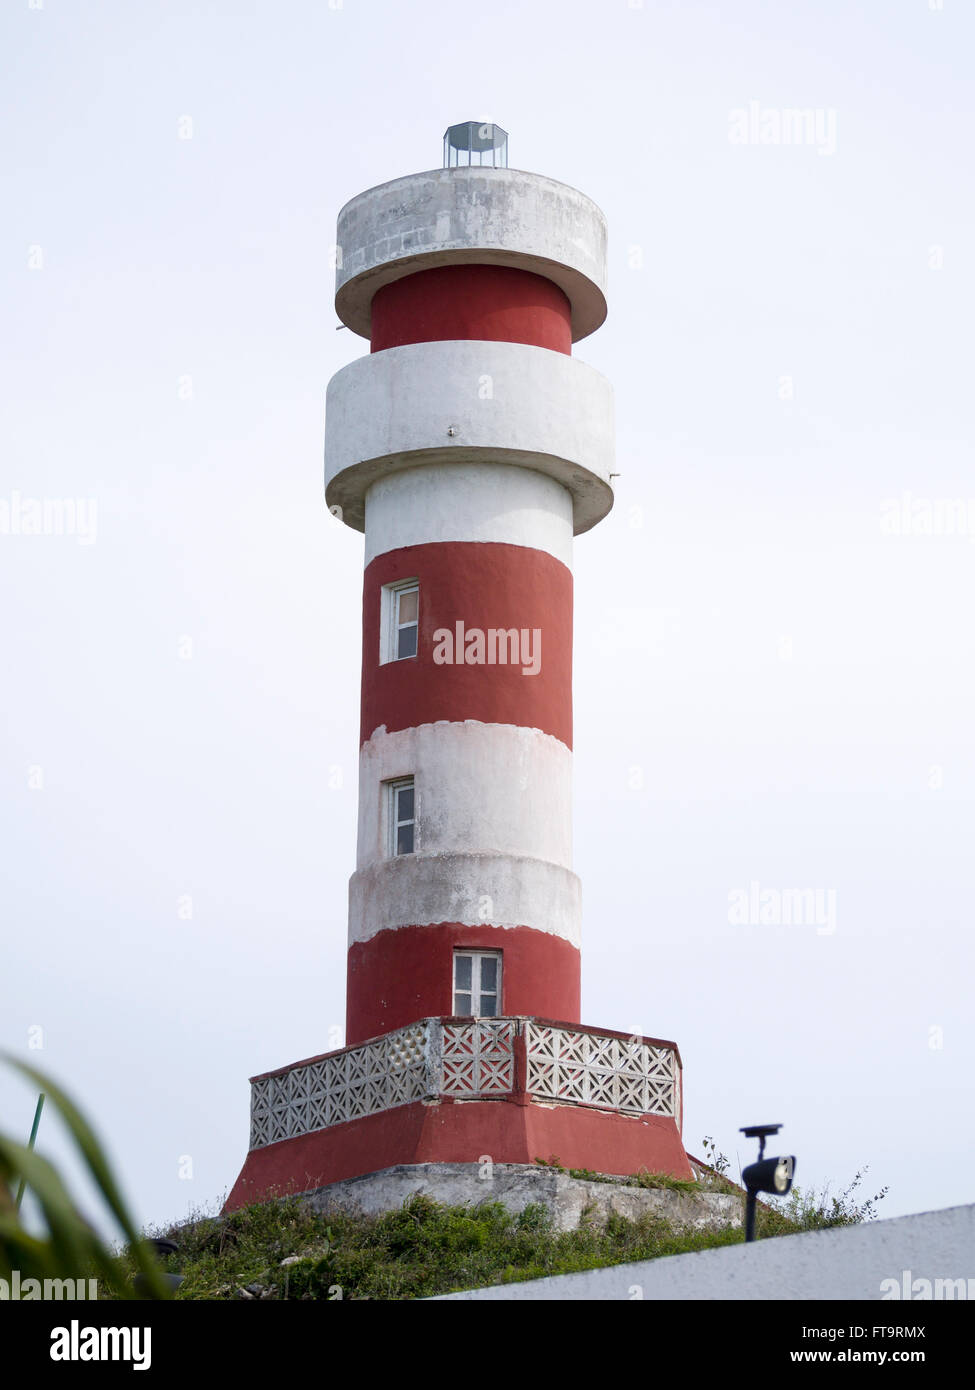 Red and White striped Lighthouse at El Cuyo. High above the village,a red and white striped lighthouse provides navigation aid Stock Photo